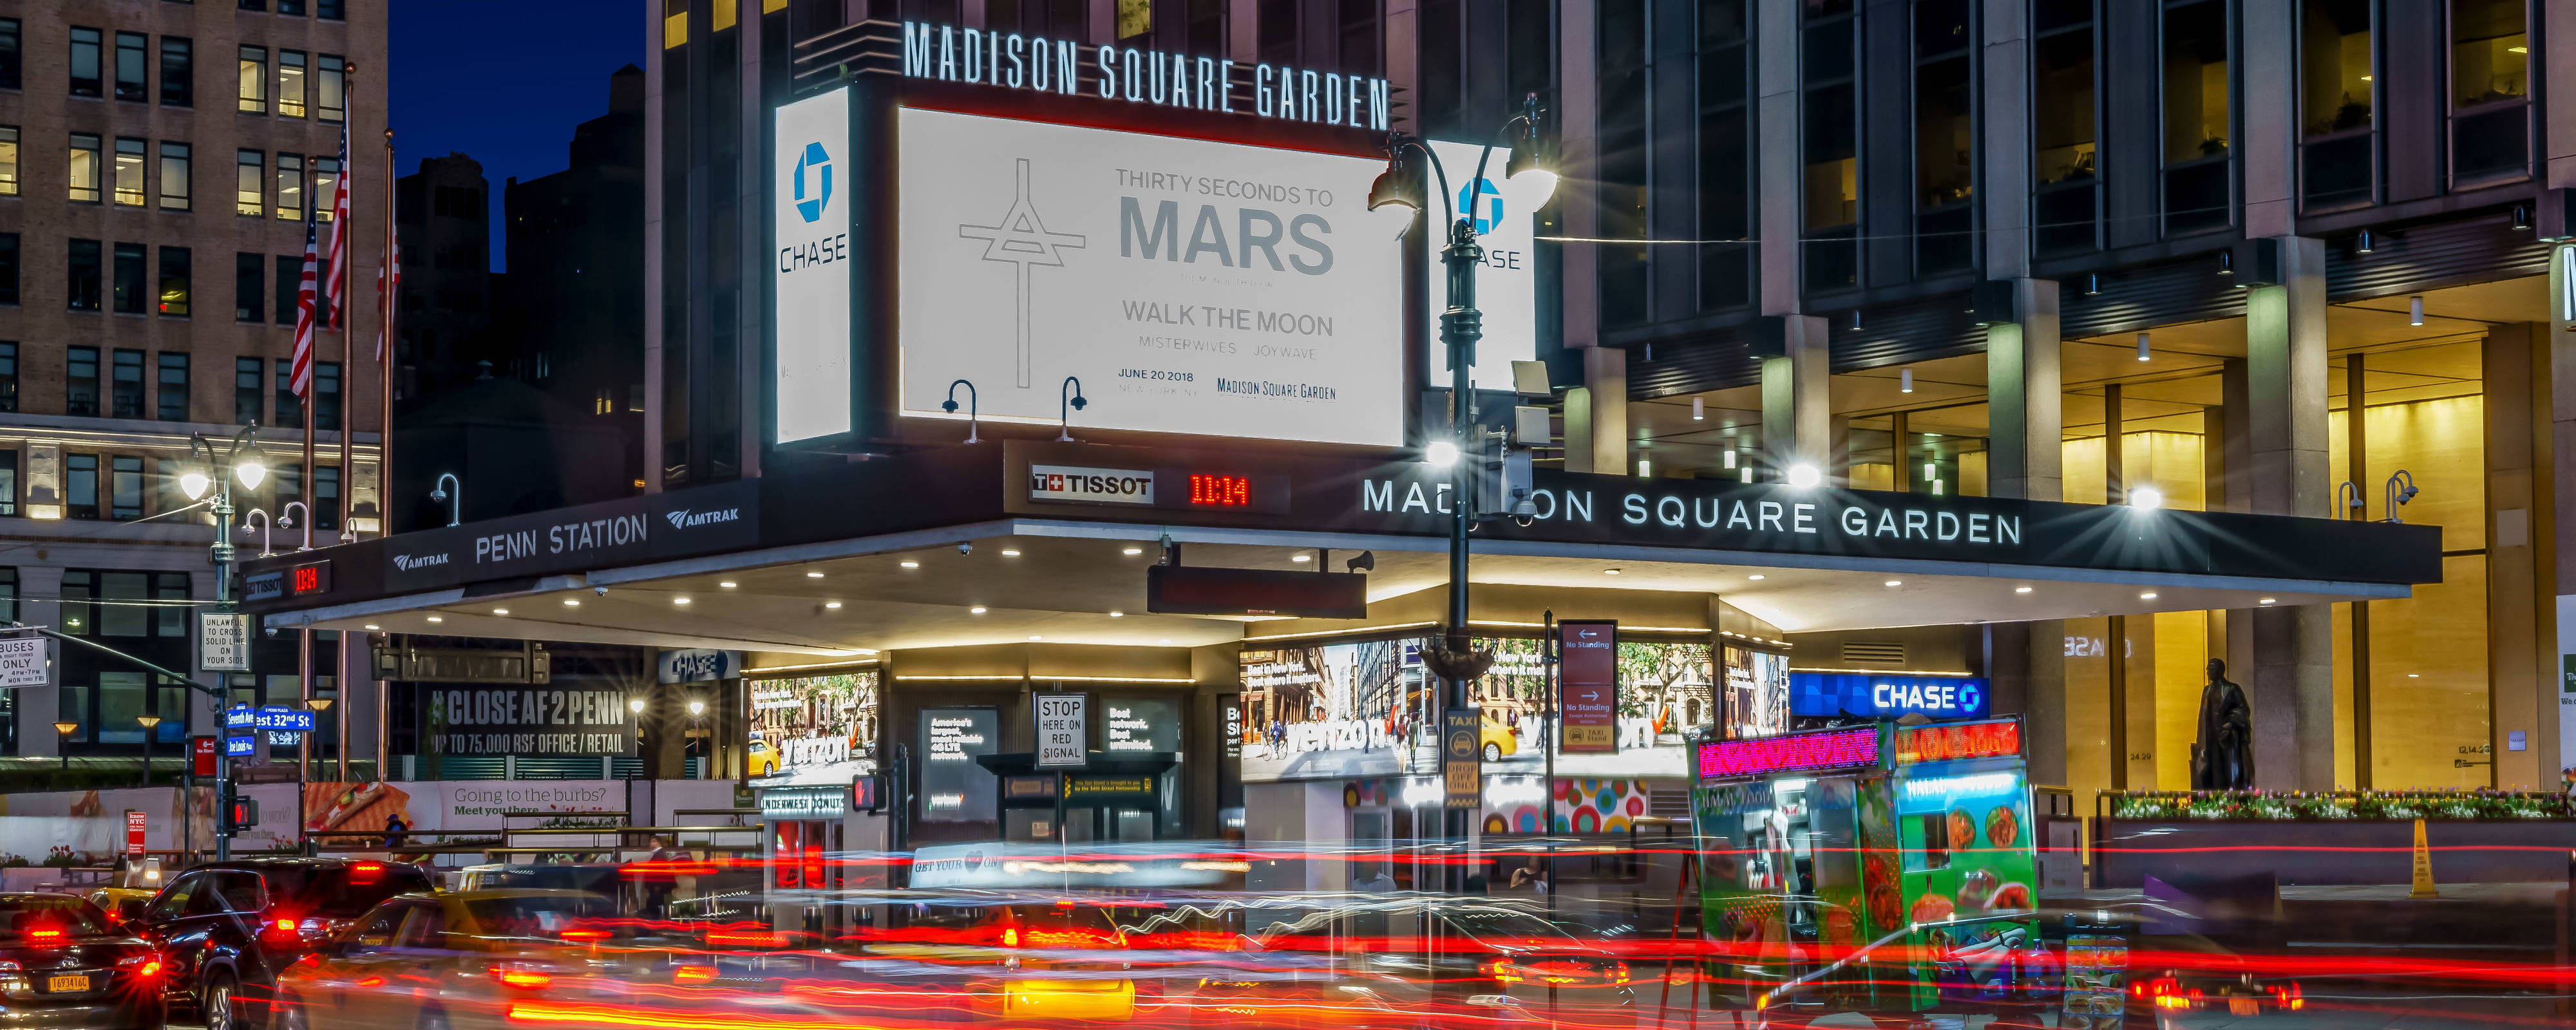 Hotels near madison square garden with free breakfast